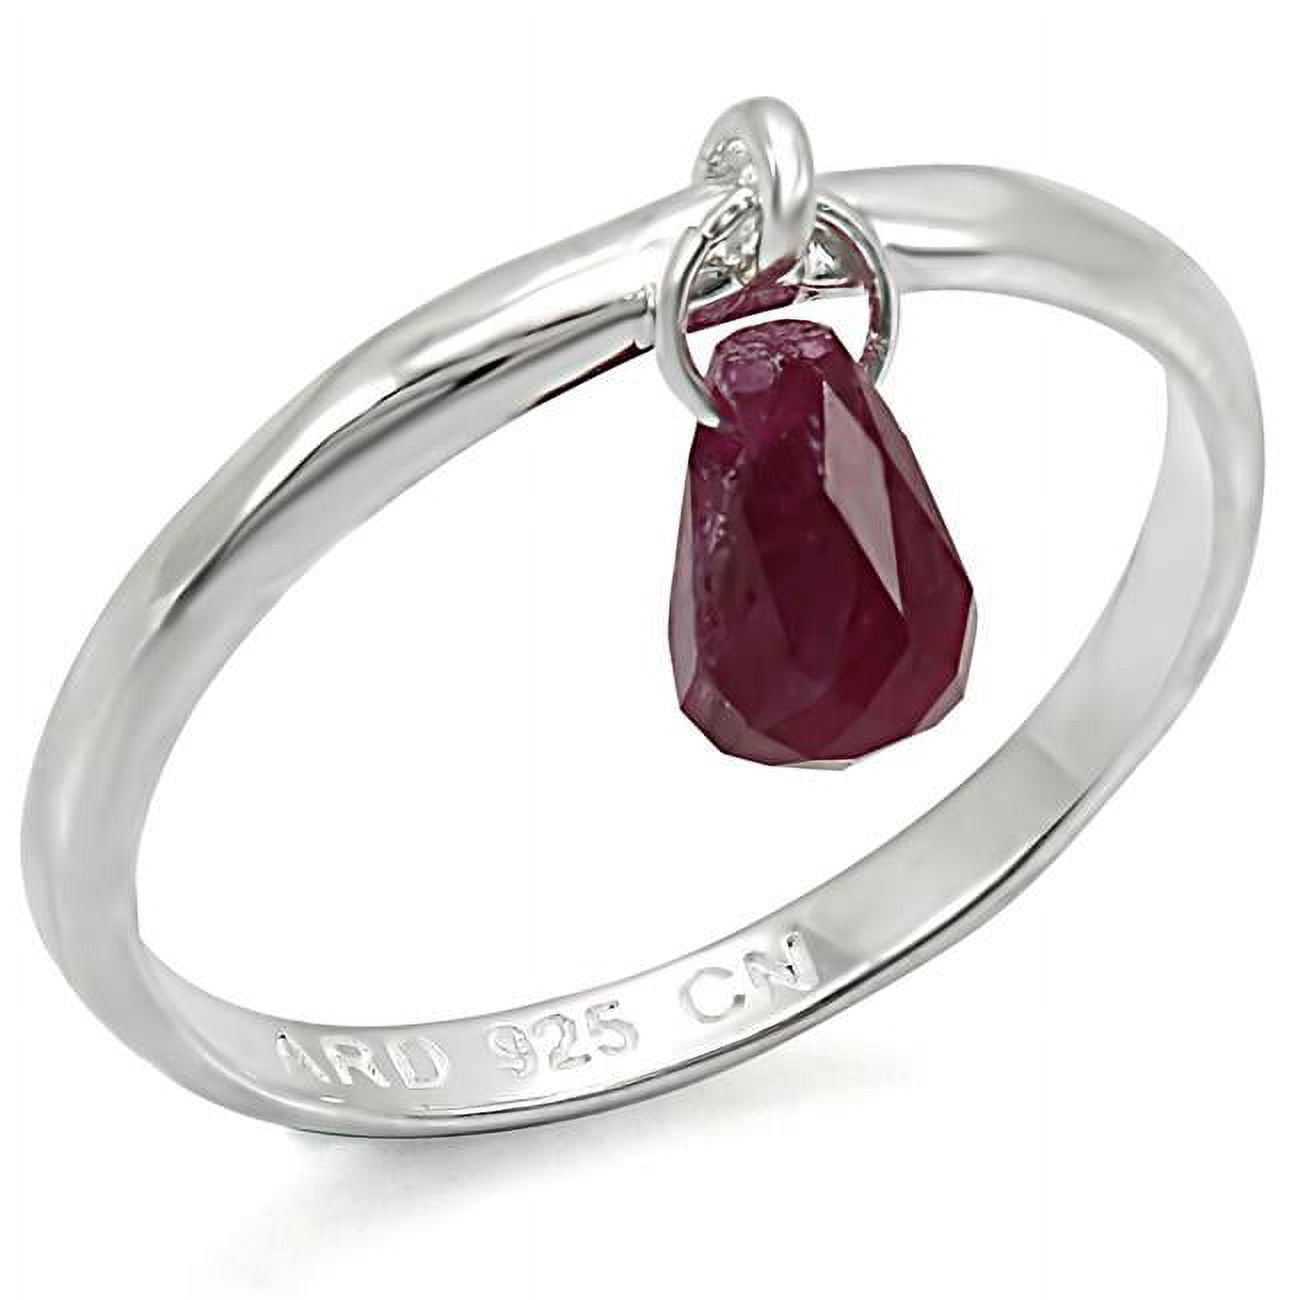 Picture of Alamode LOS324-6 Women Silver 925 Sterling Silver Ring with Genuine Stone in Ruby - Size 6